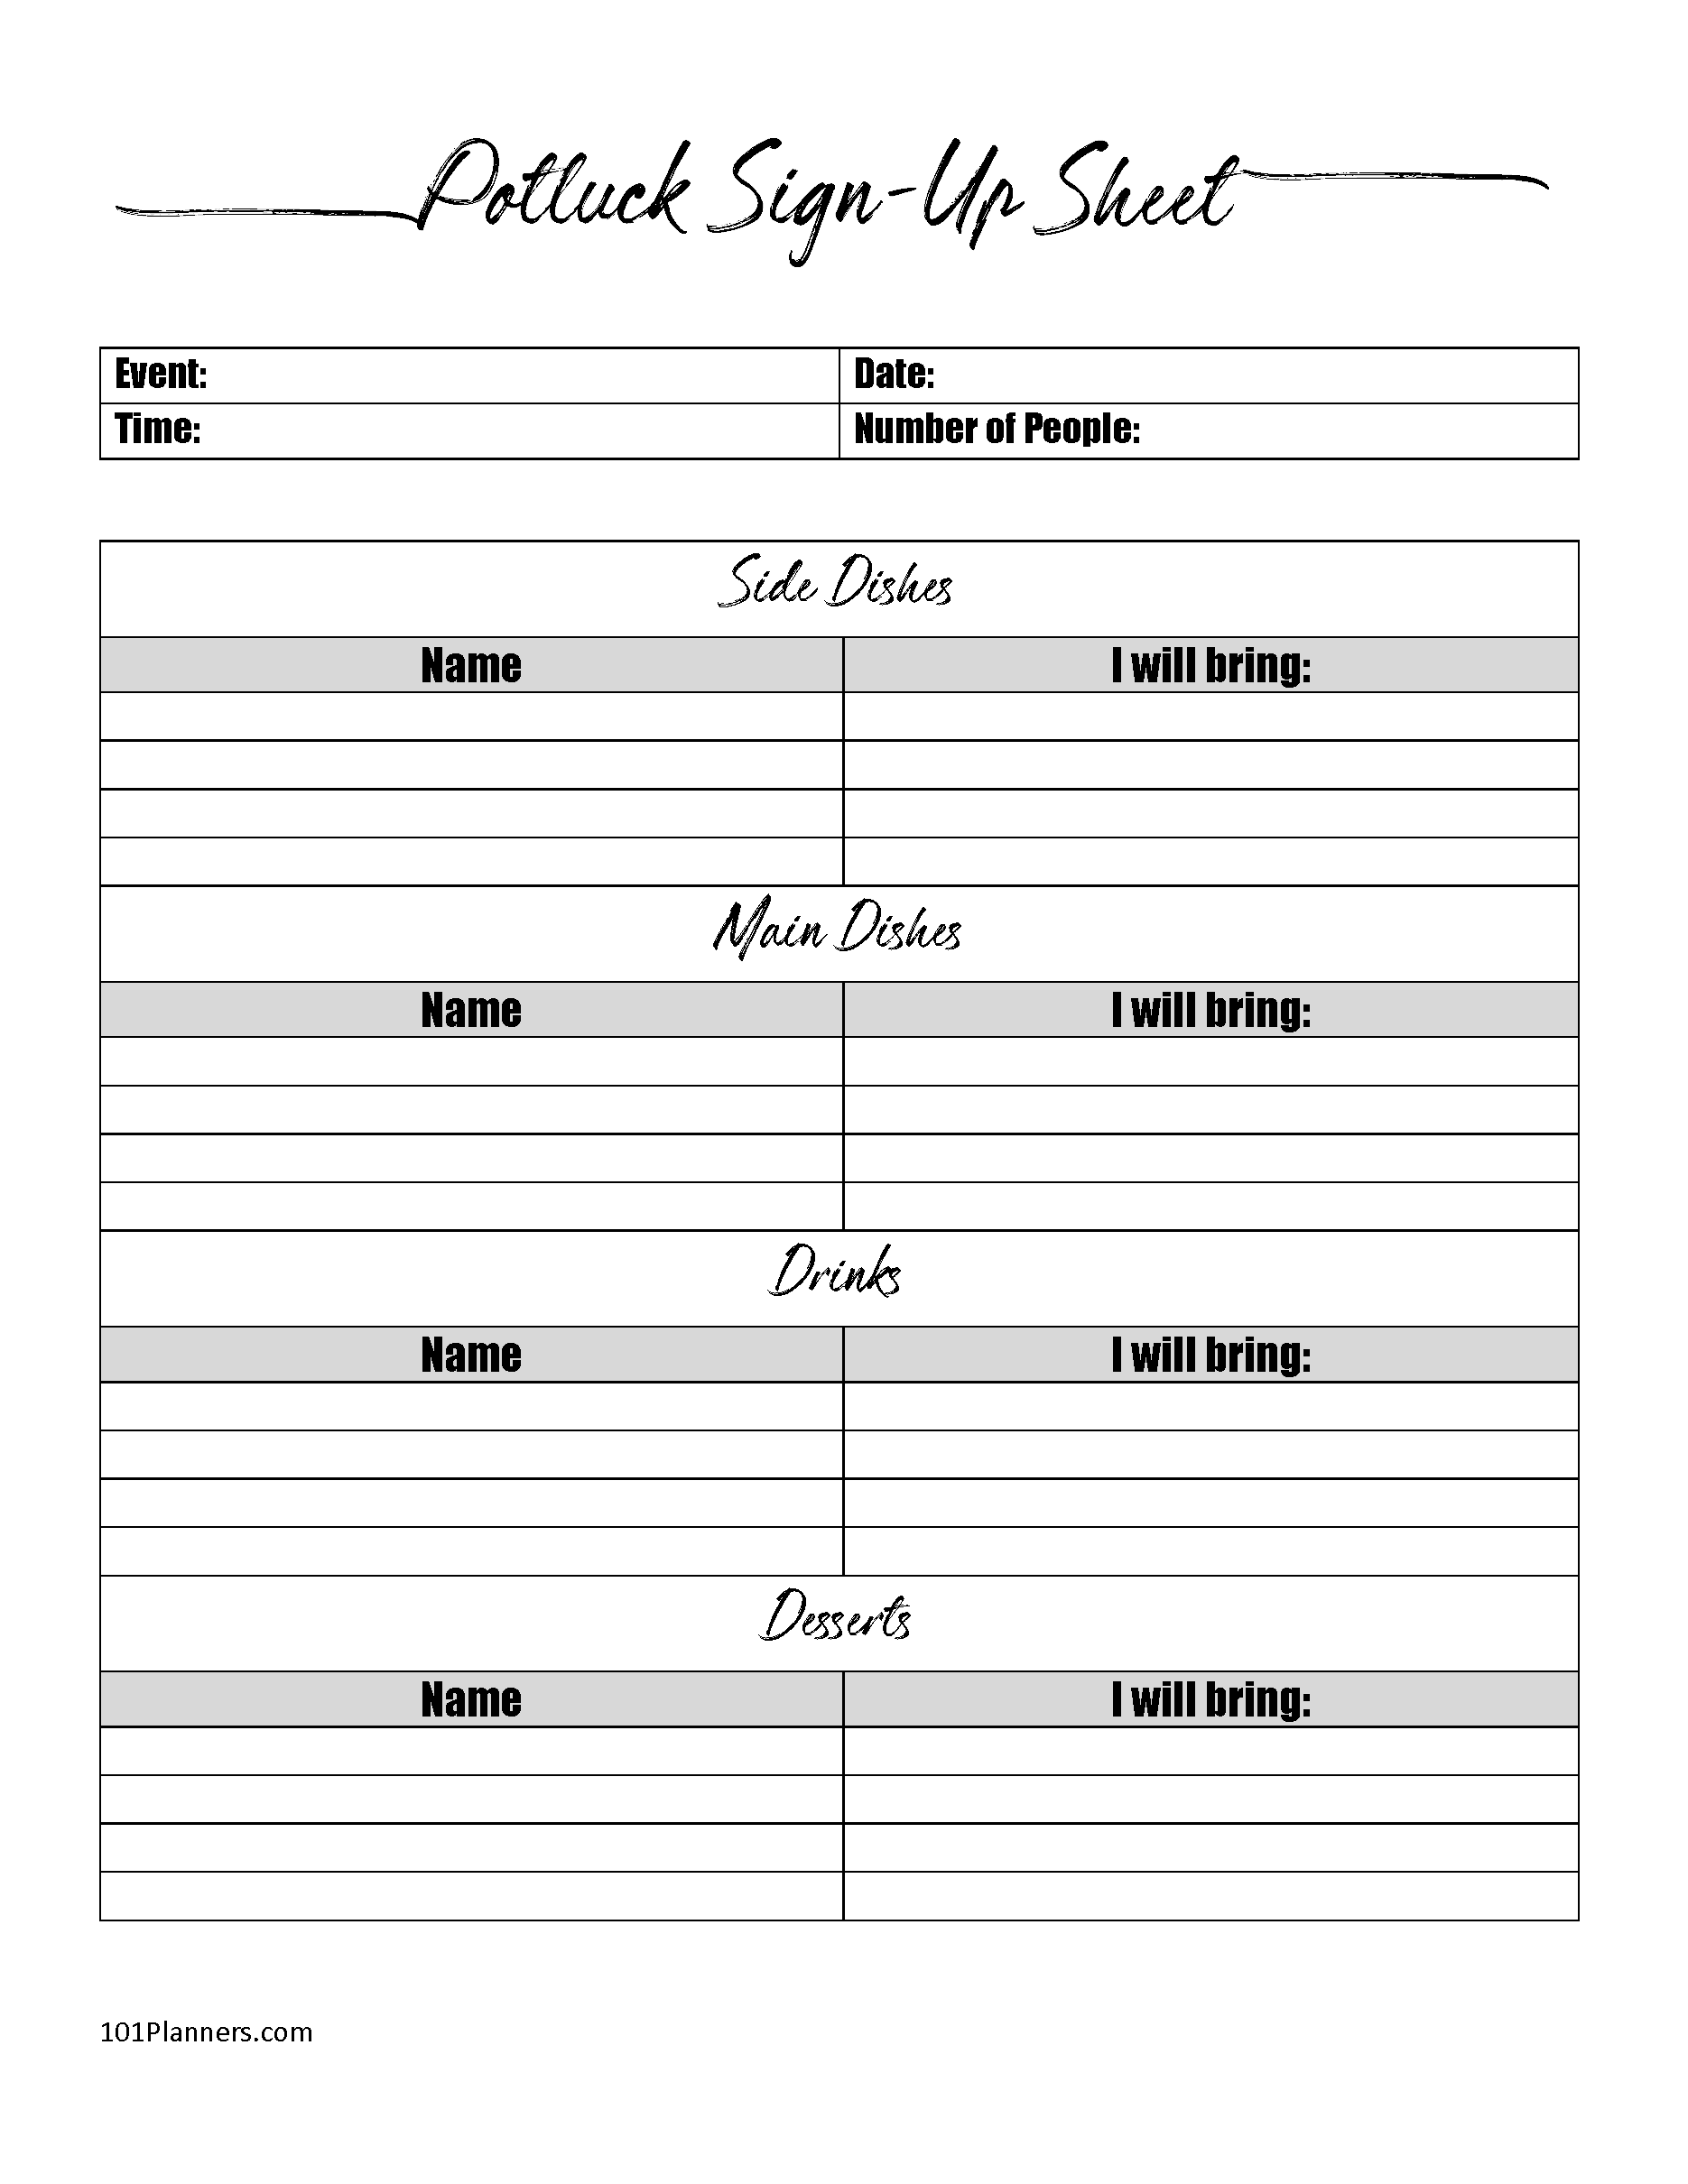 FREE Printable Potluck Sign Up Sheet Editable Instant Download